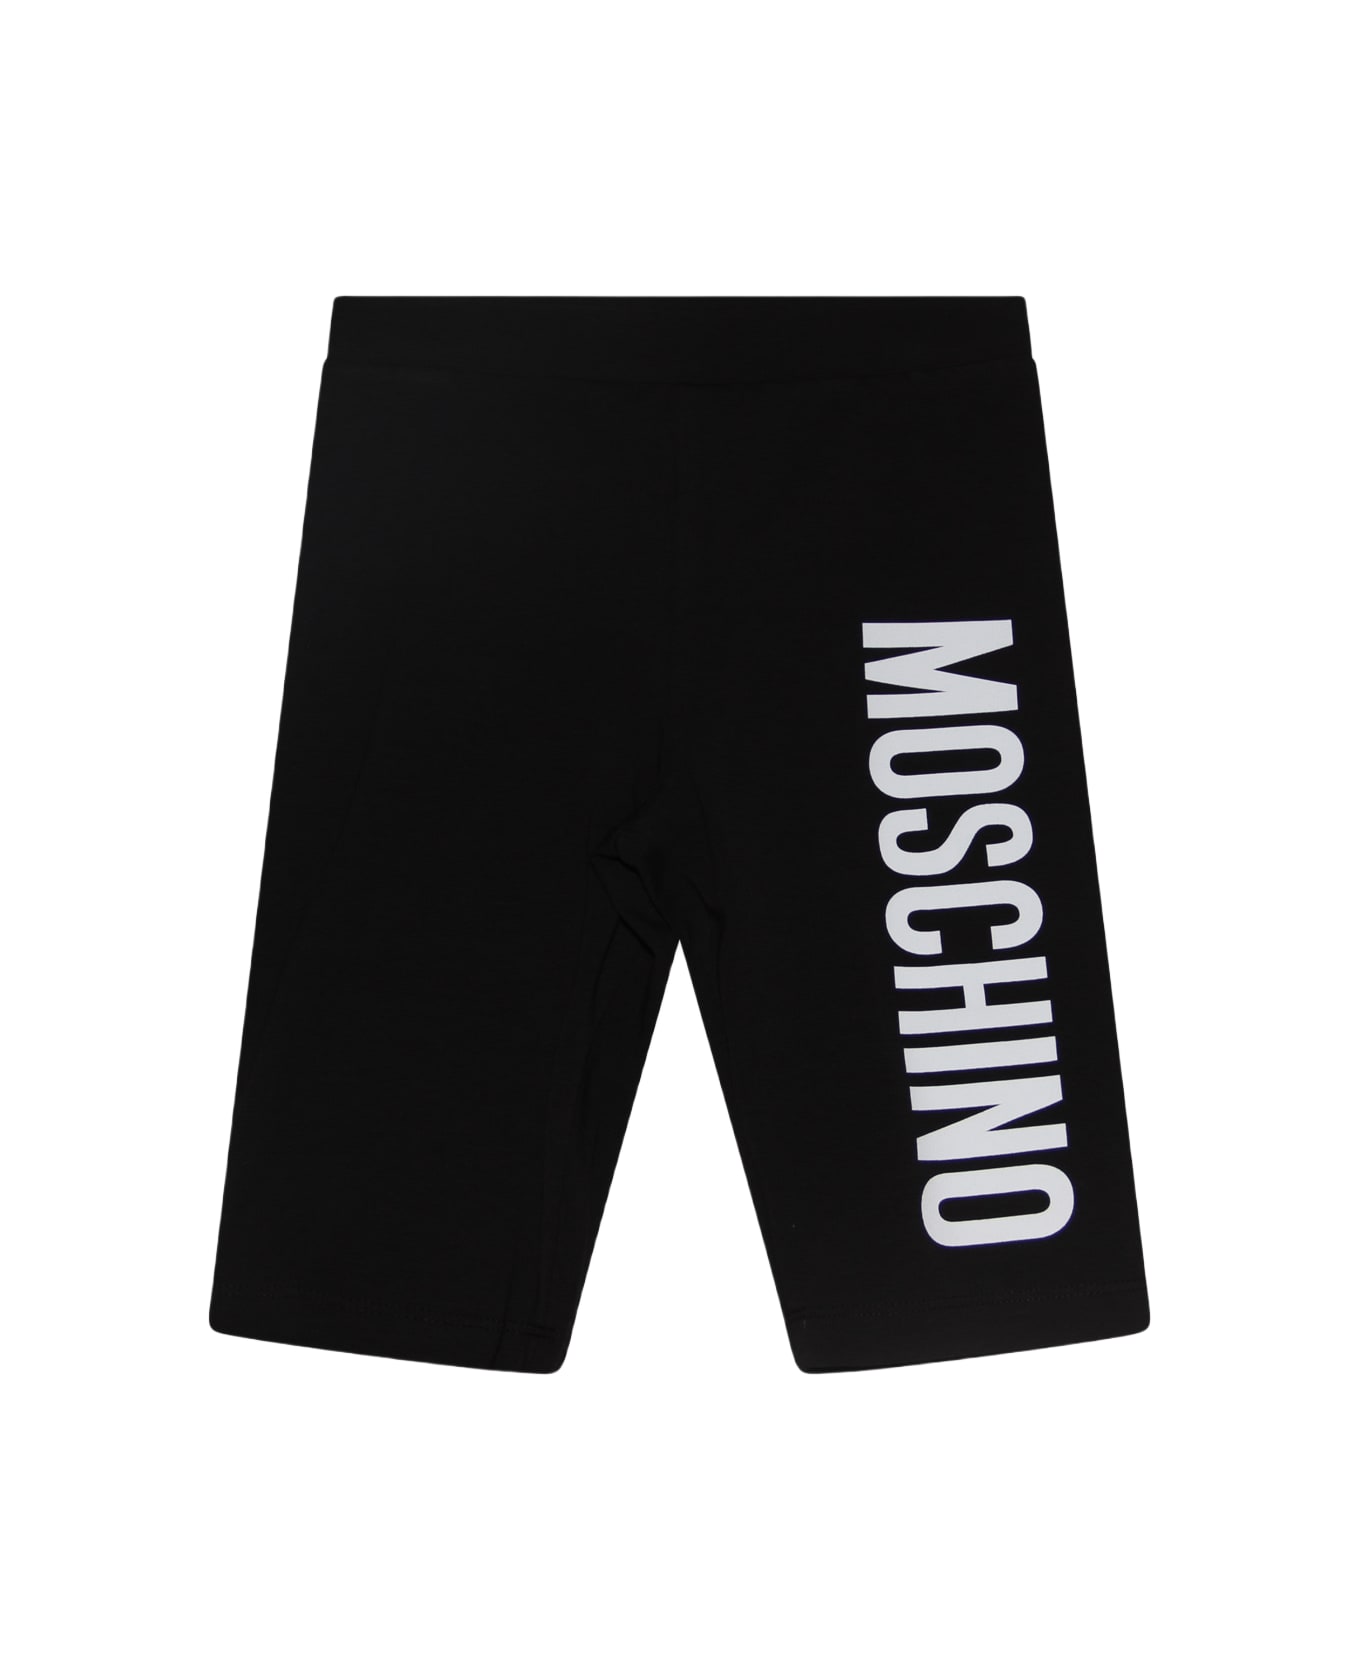 Moschino Black And White Cotton Blend Shorts